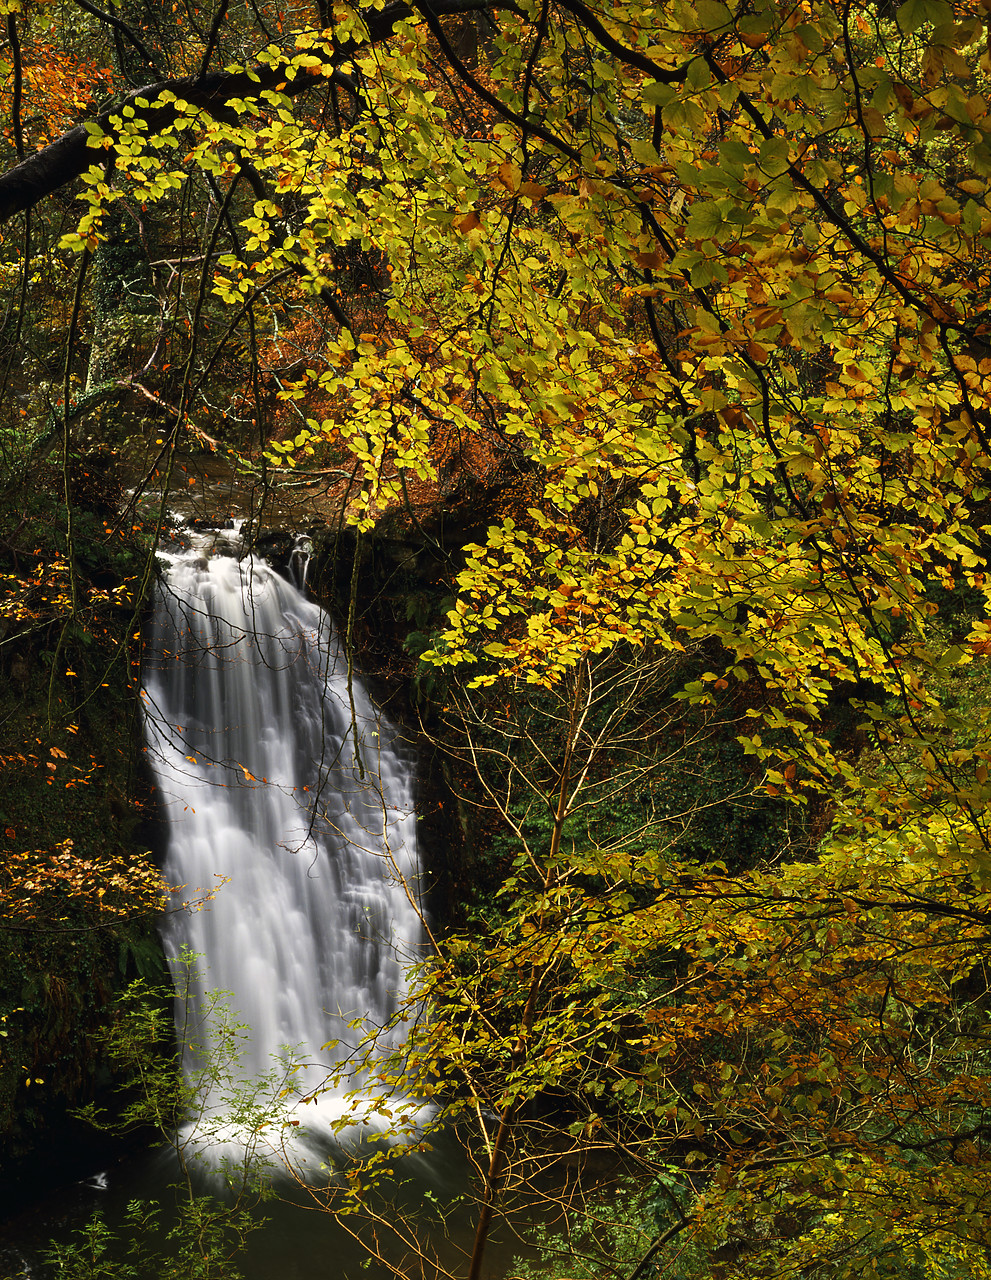 #924120-5 - Falling Foss in Autumn, North Yorkshire, England